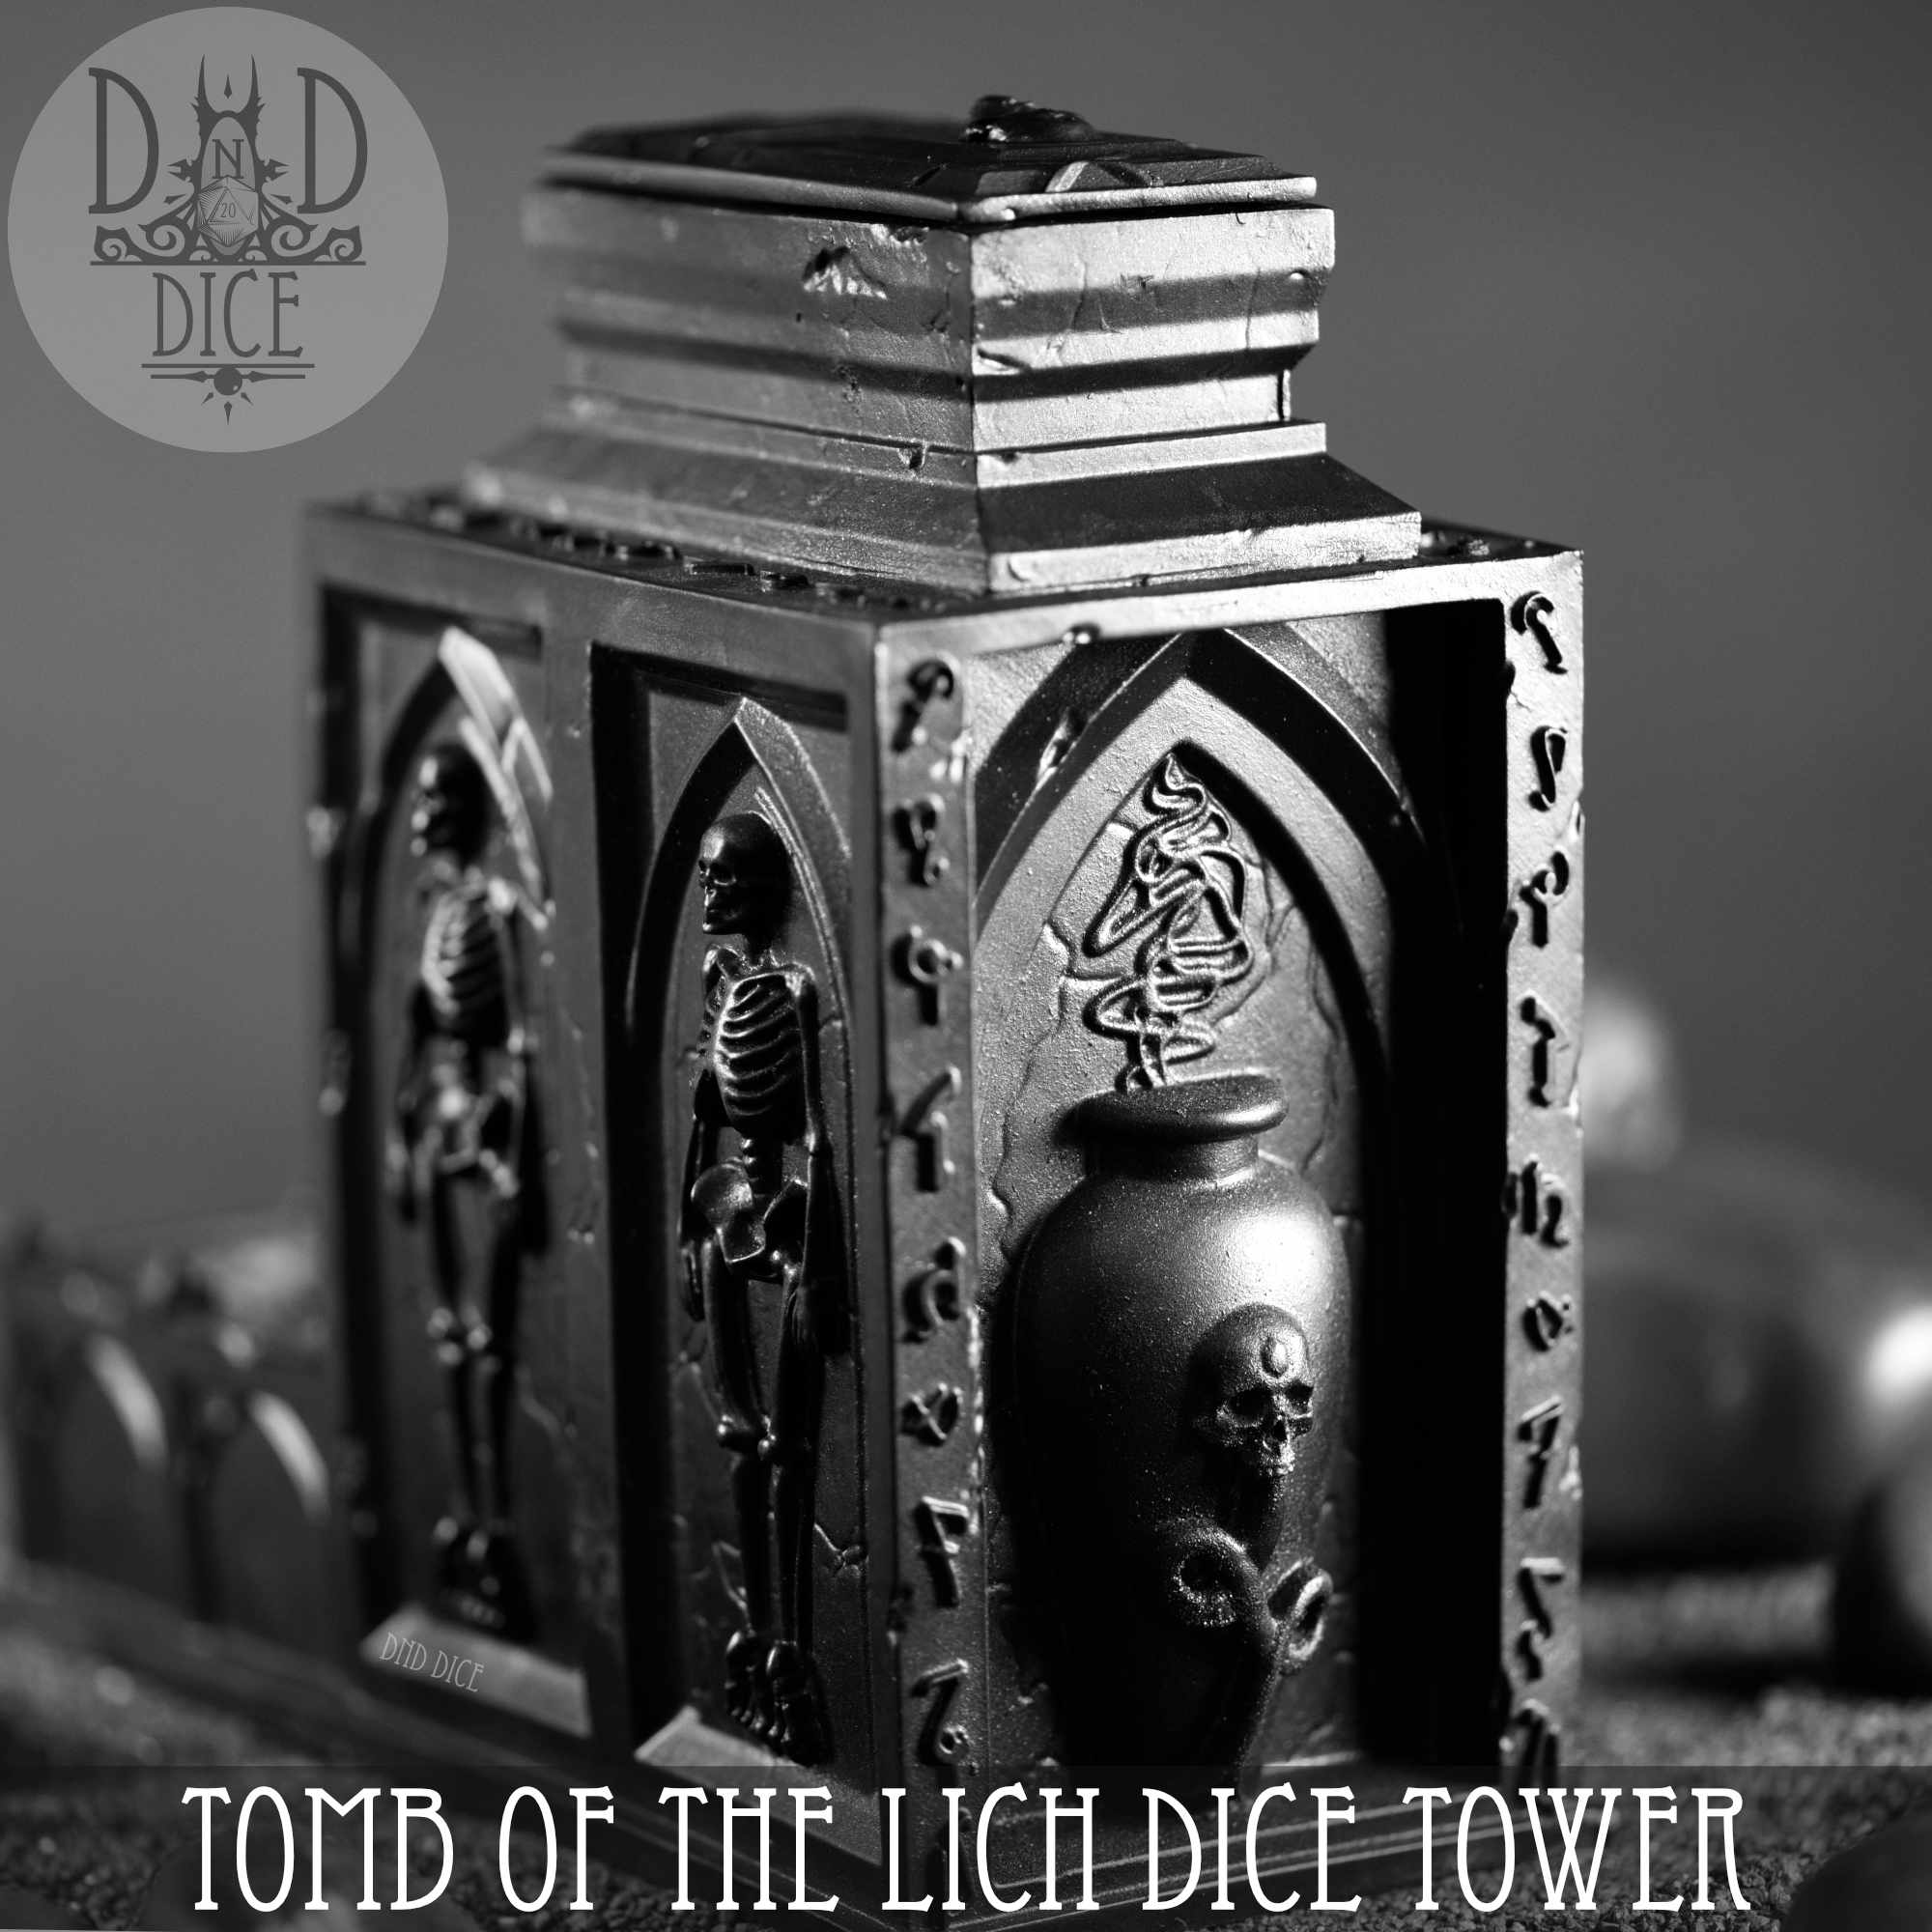 Tomb of the Lich - Dice Tower